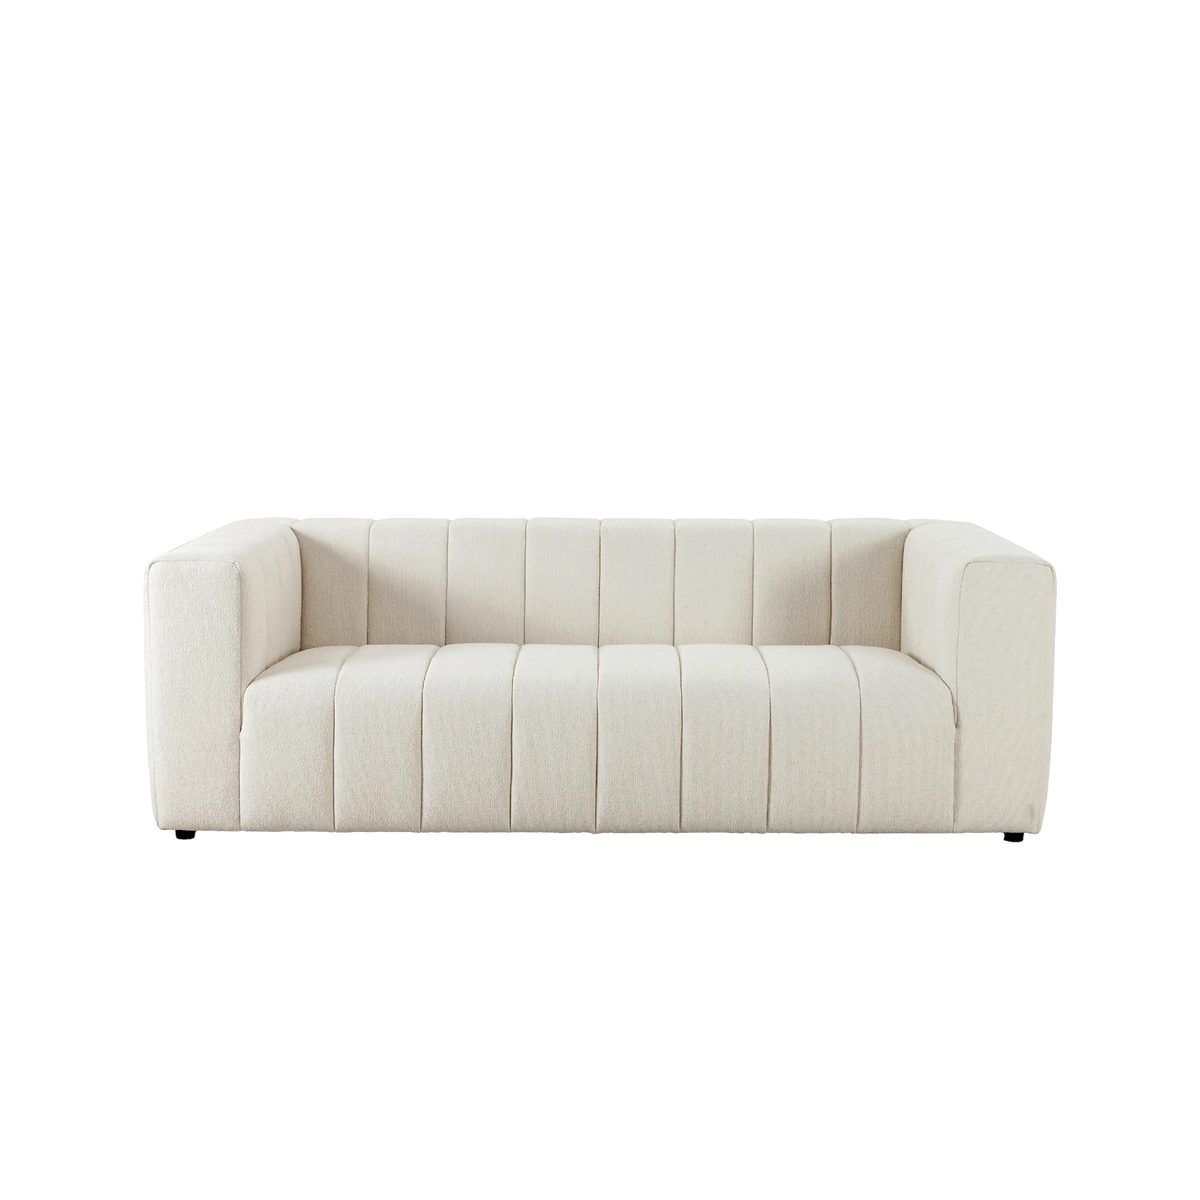 Experience the art of lounging in style with the Santos Sofa.